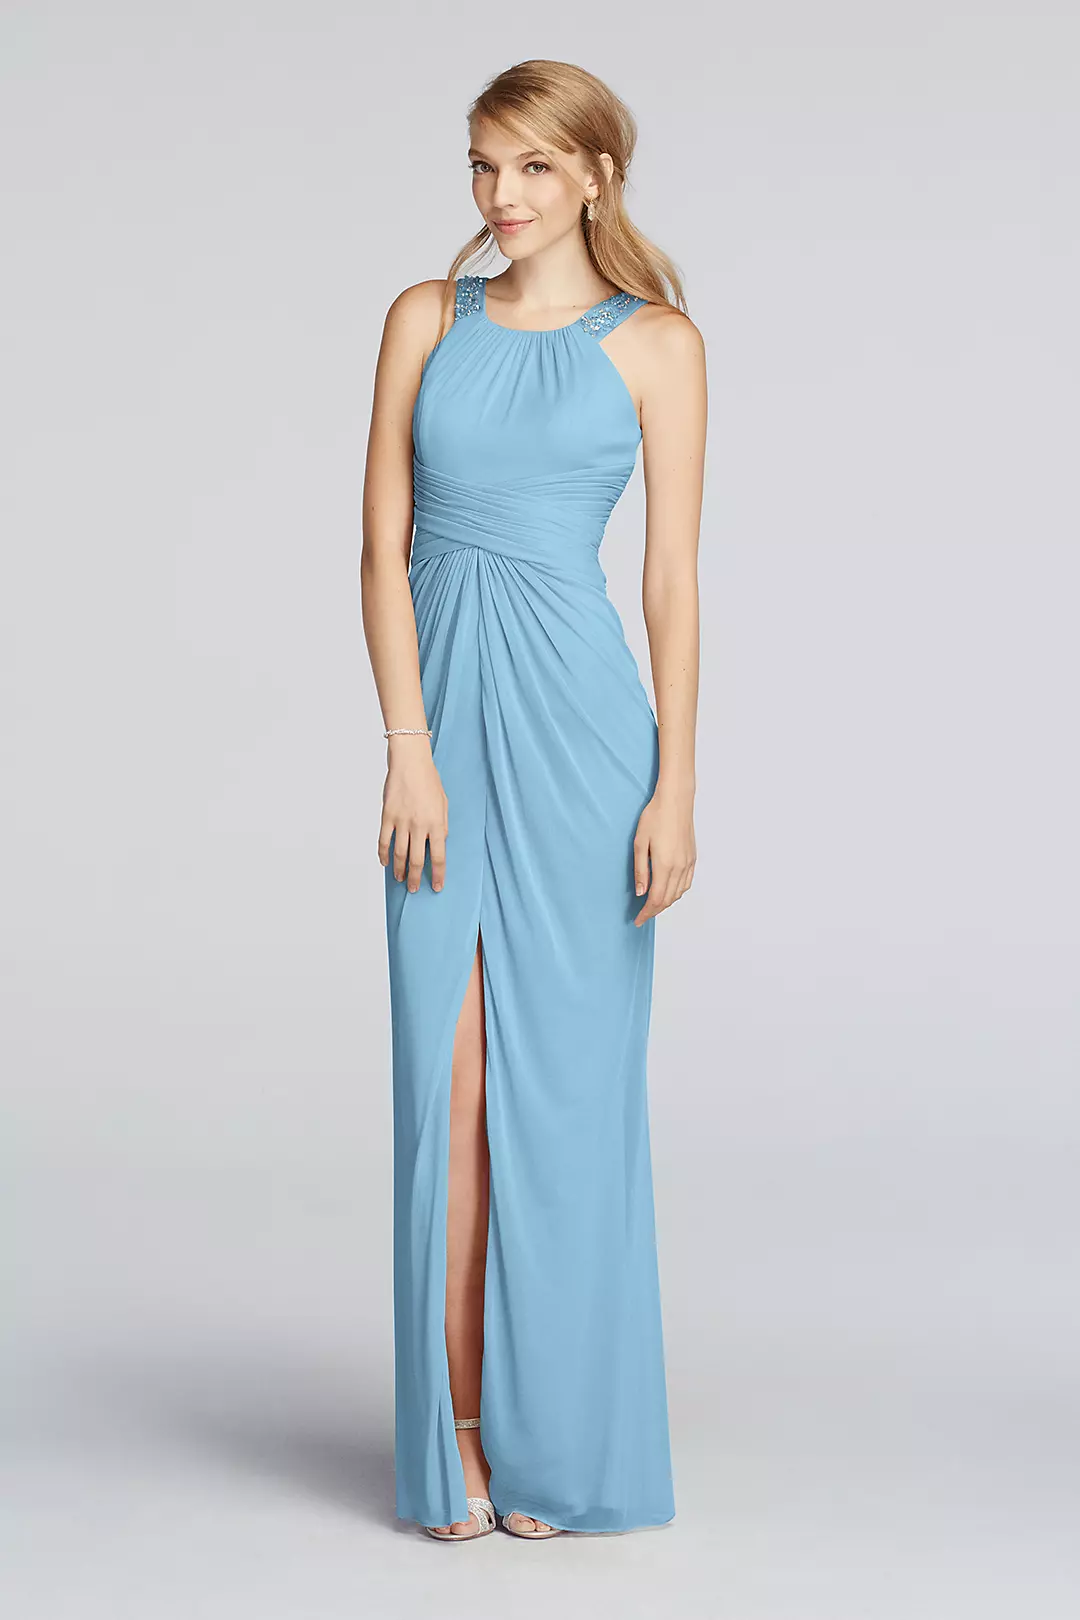 Long Beaded U Neck Mesh Dress with Ruched Waist Image